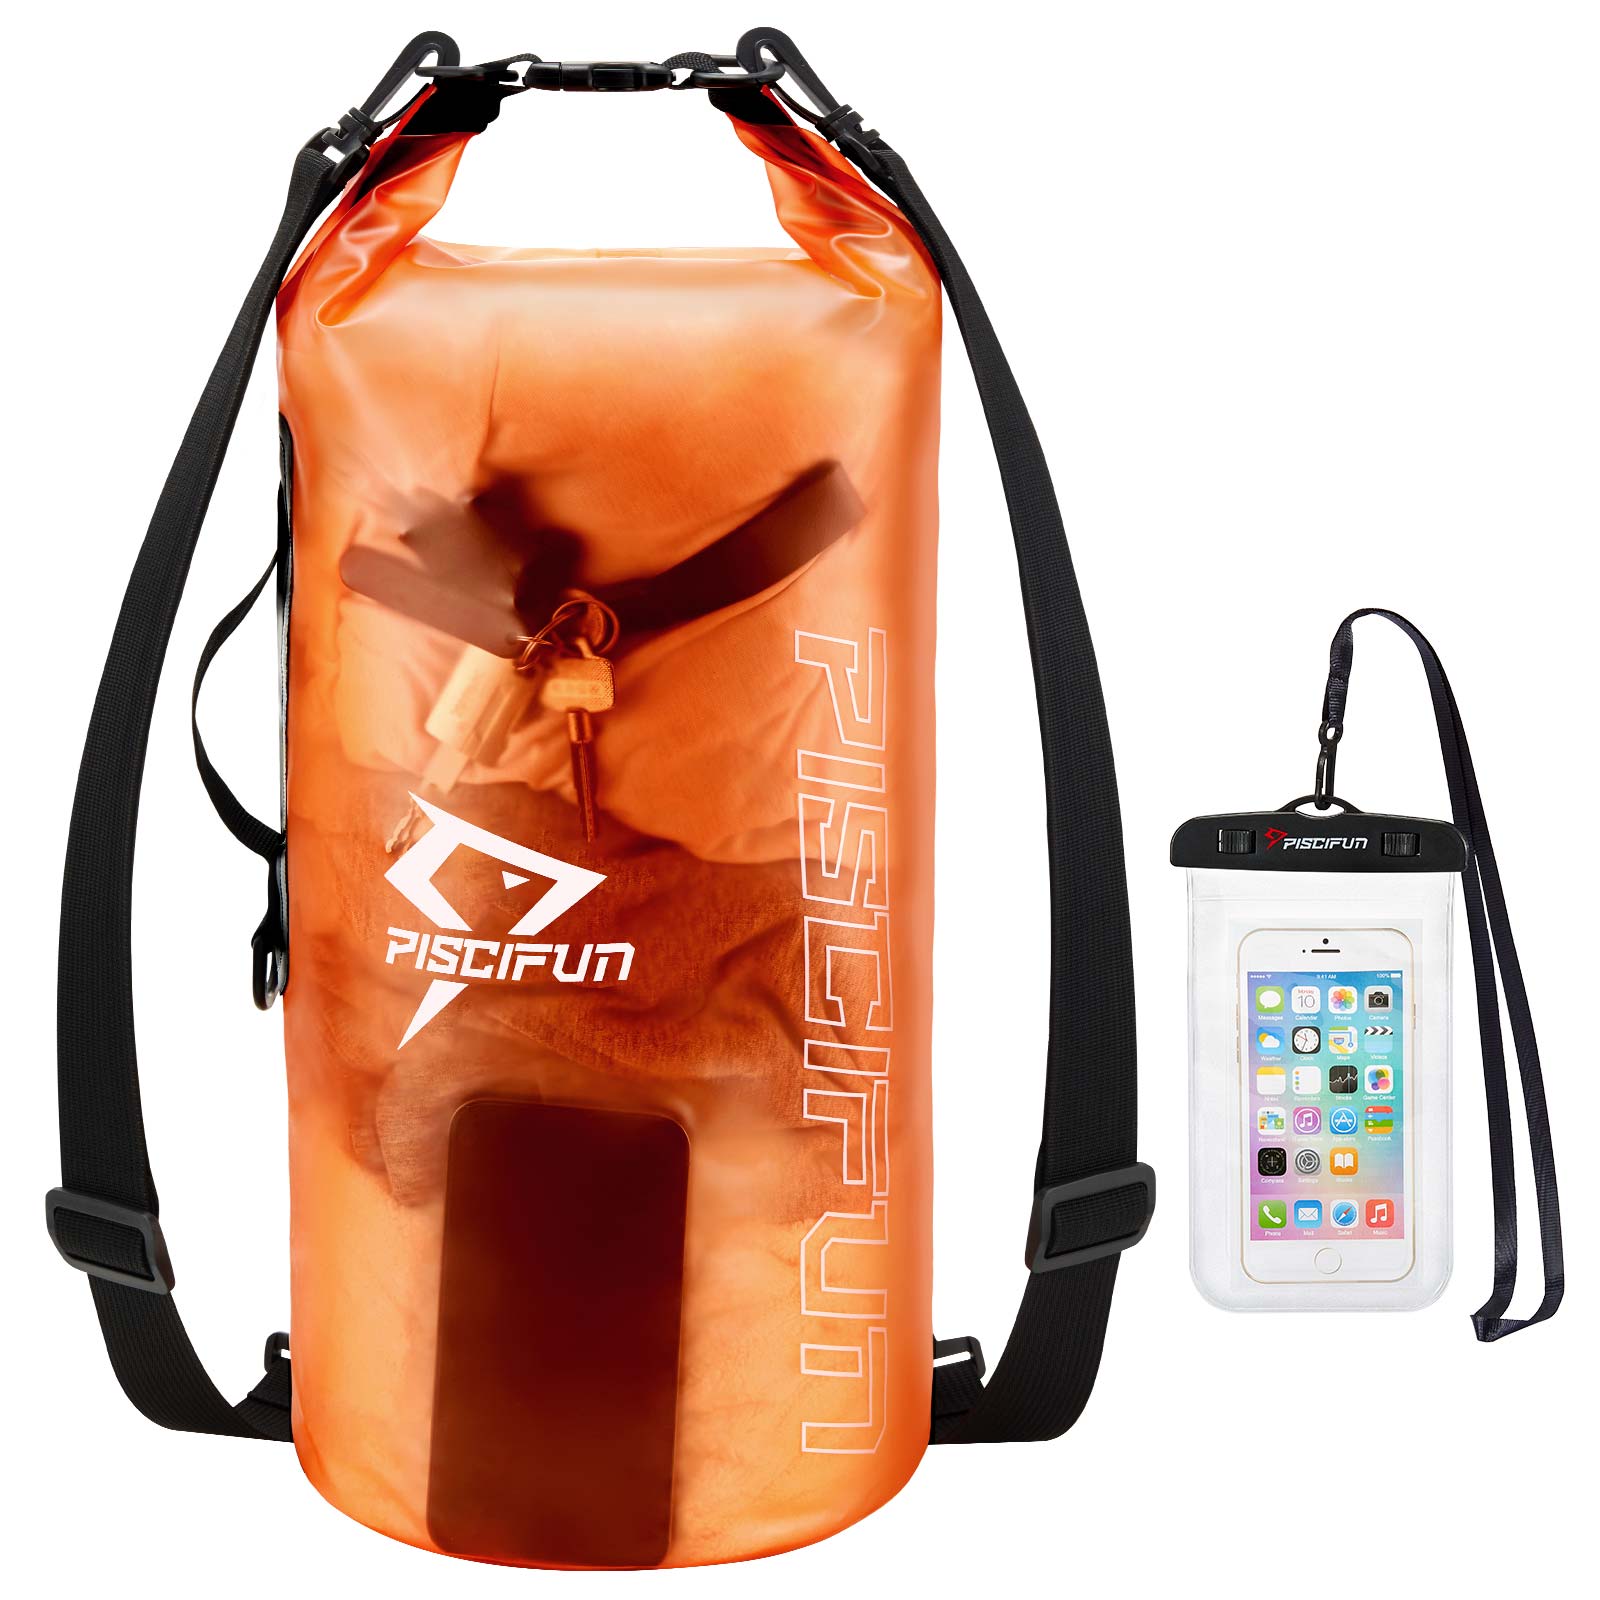 Piscifun® Waterproof Dry Bag with Phone Case,Transparent Dry Bag  2L/5L/10L/20L/30L/40L | Piscifun